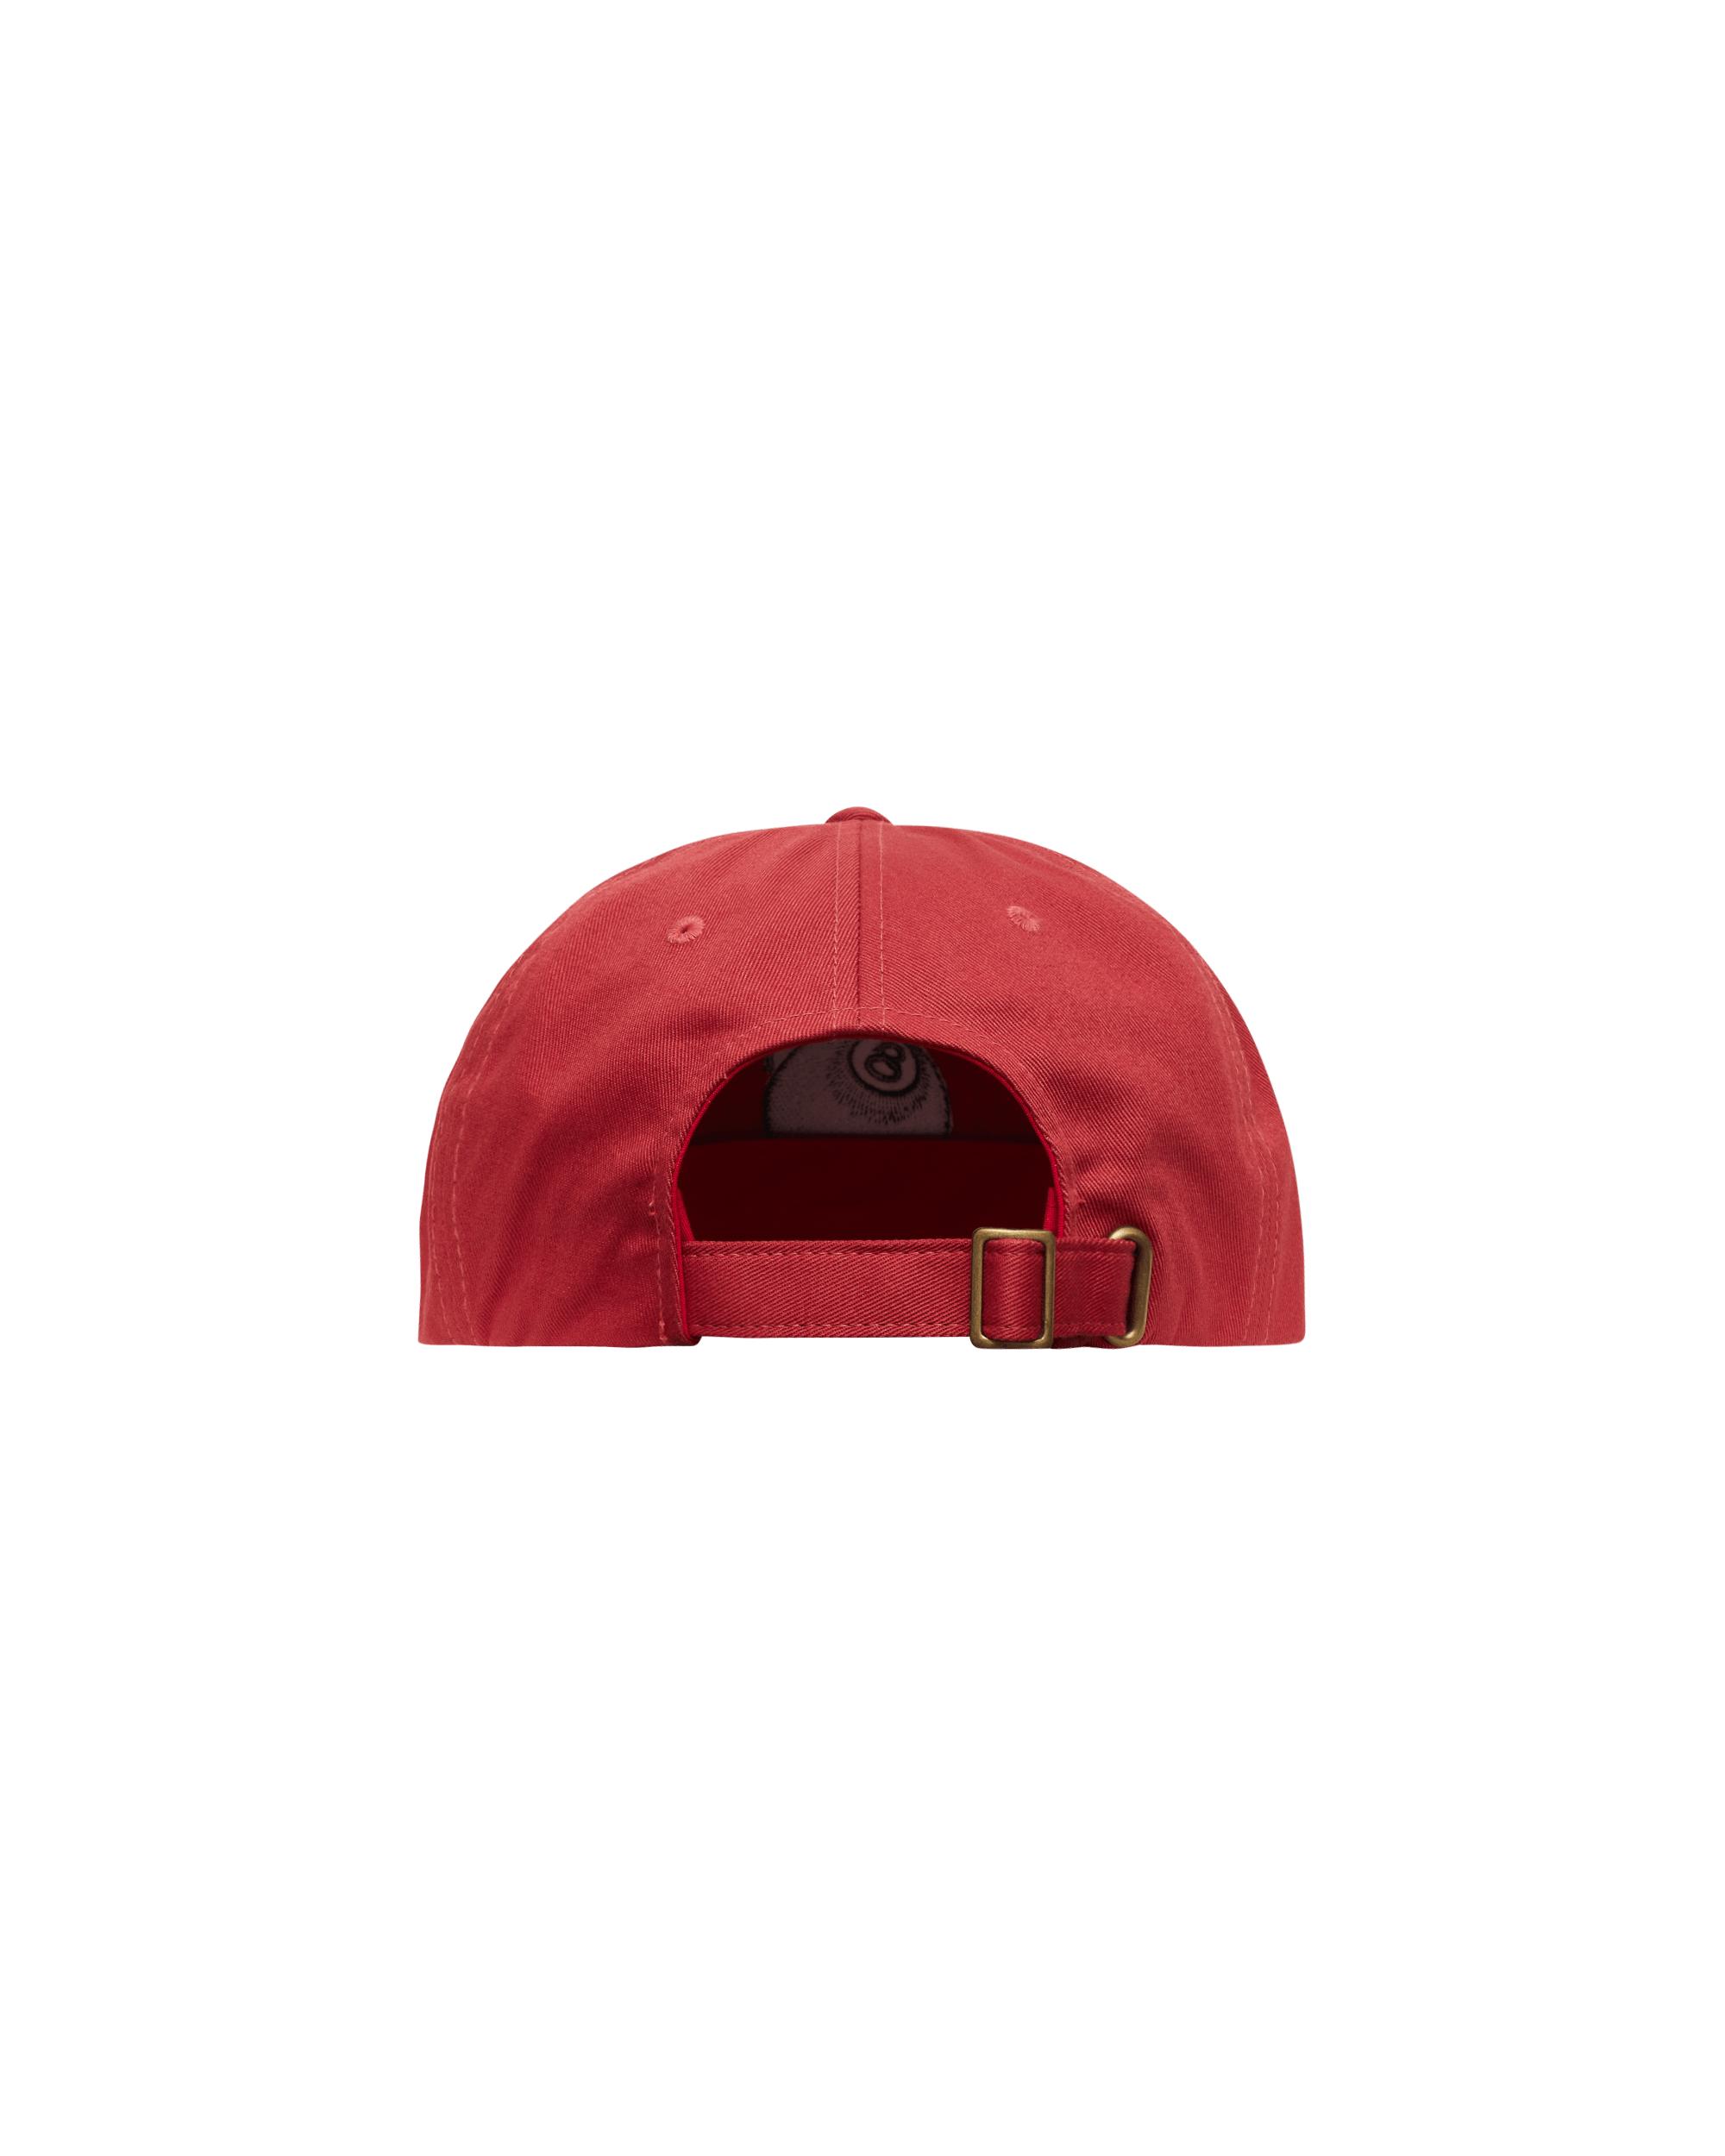 Stussy Cotton Stock 8 Ball Low Pro Cap in Charcoal (Red) for Men 